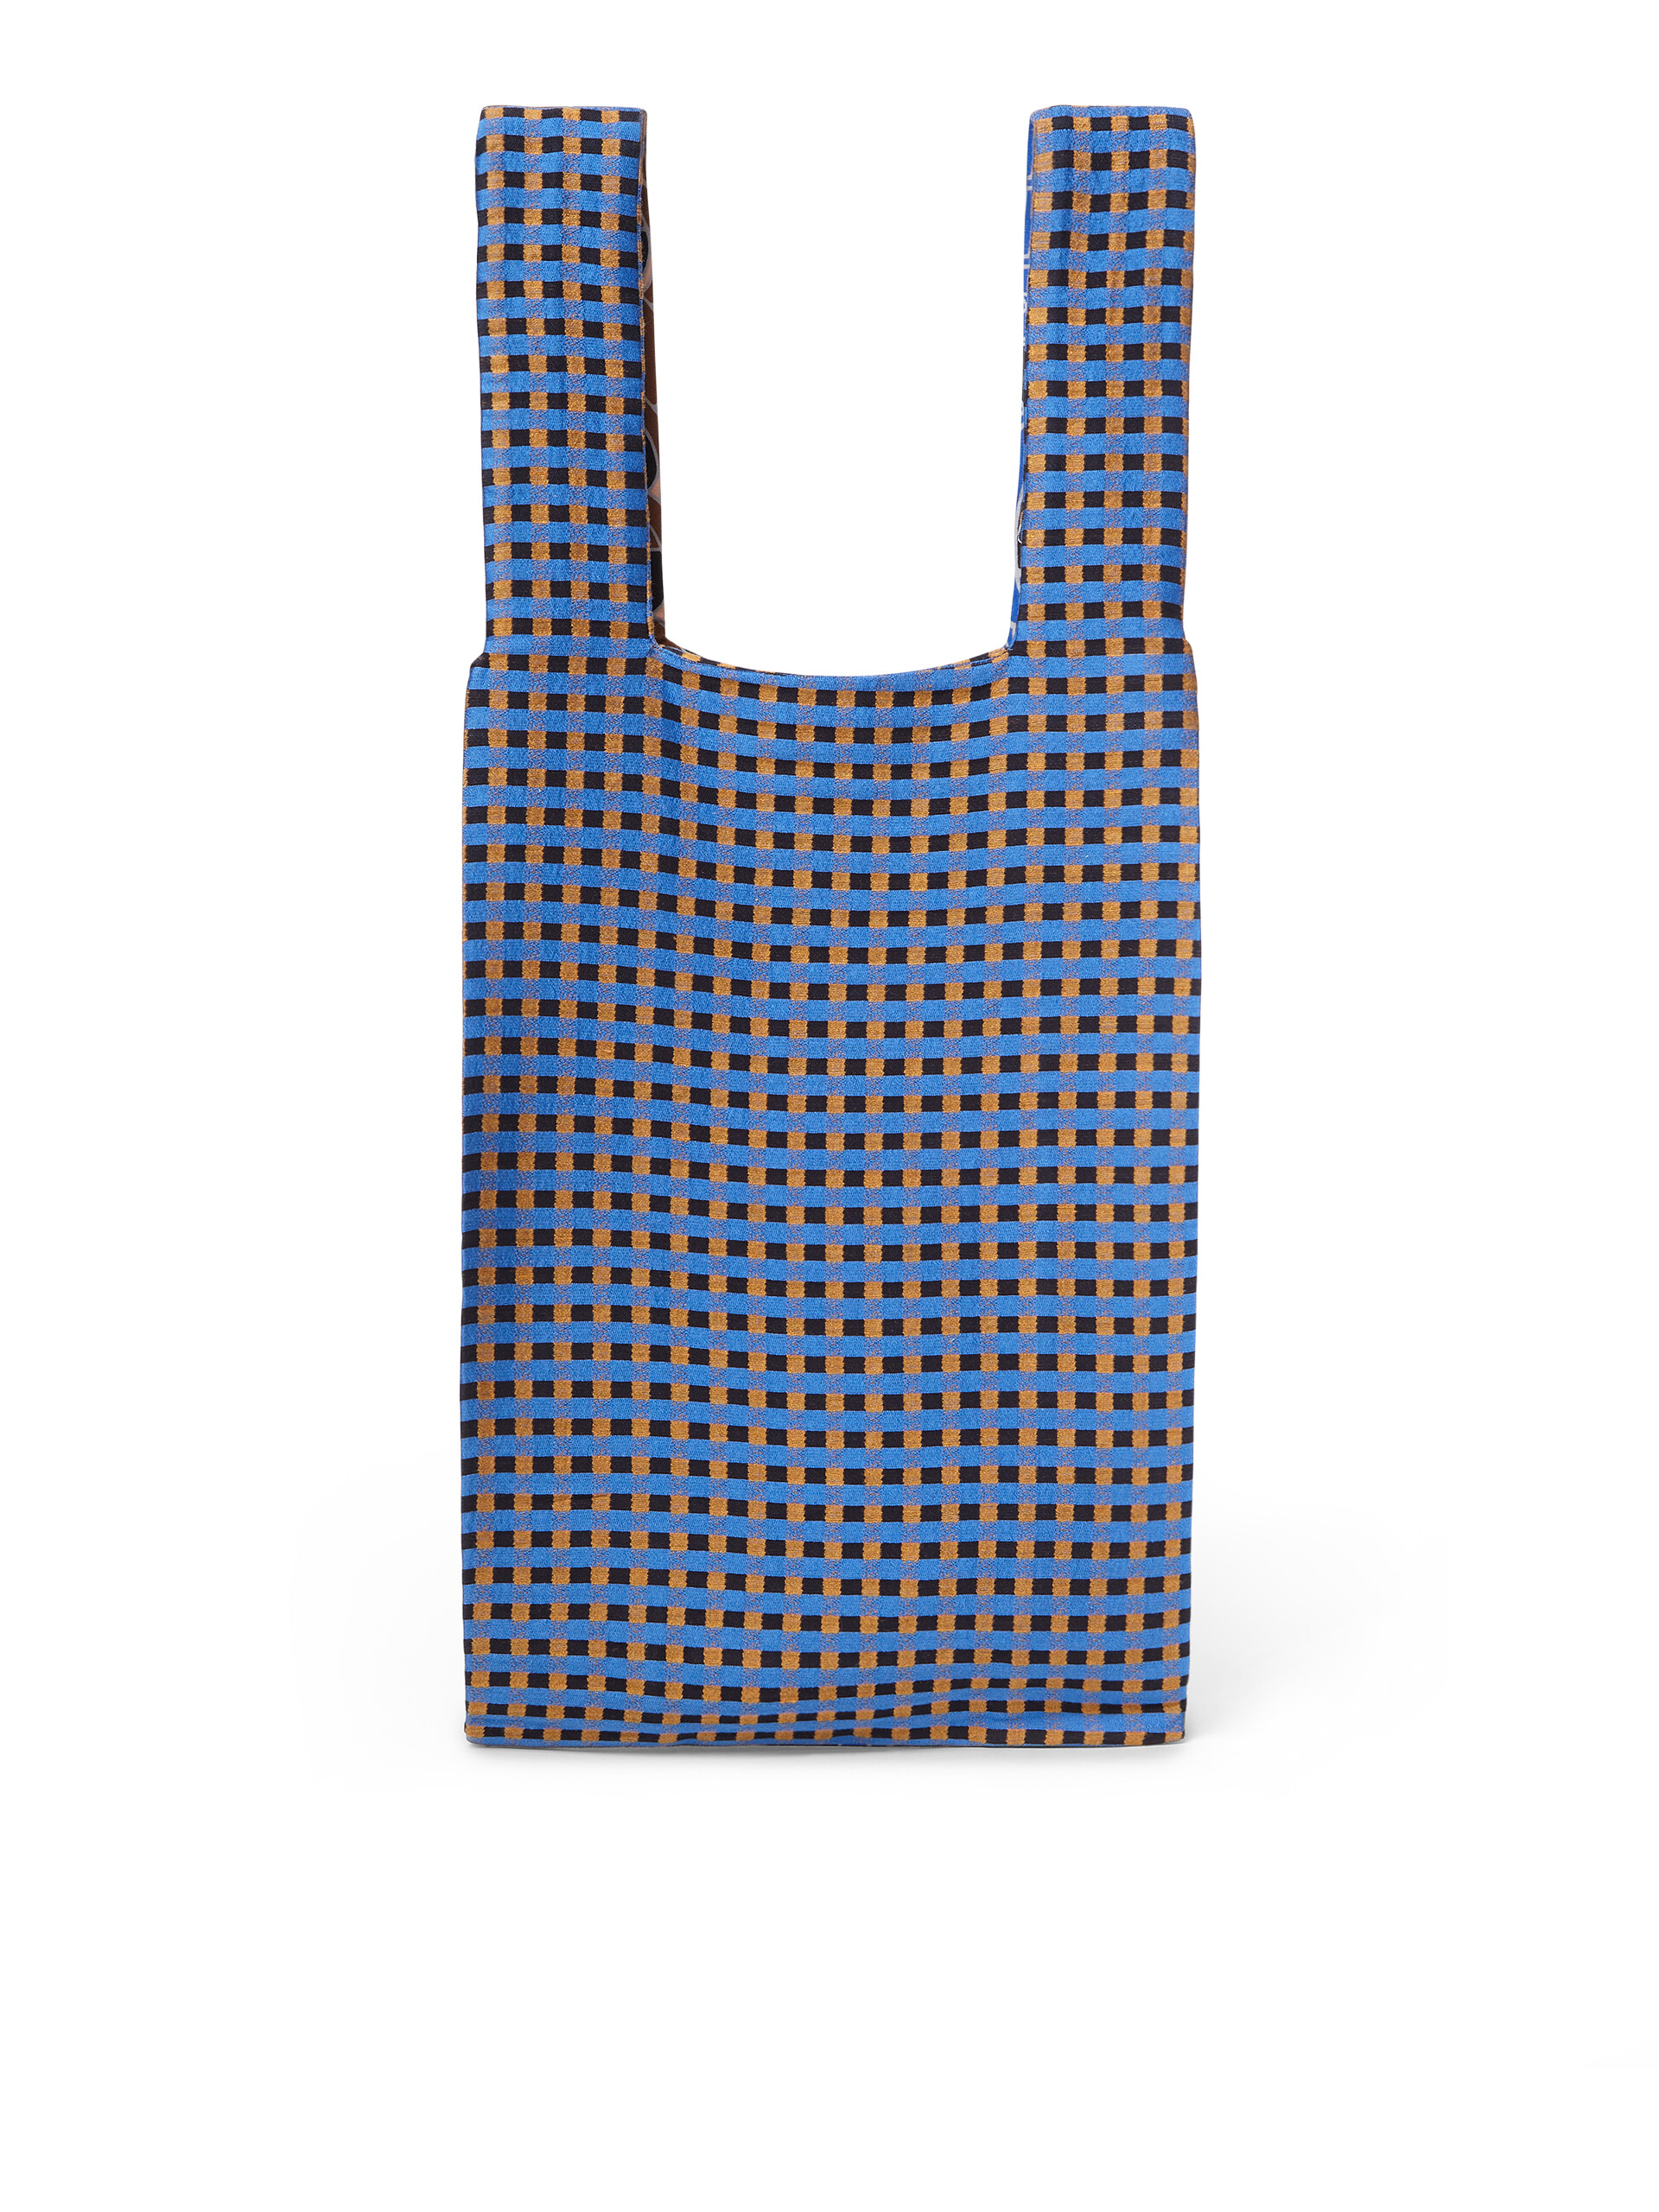 MARNI MARKET cotton shopping bag with contrast print - Shopping Bags - Image 3